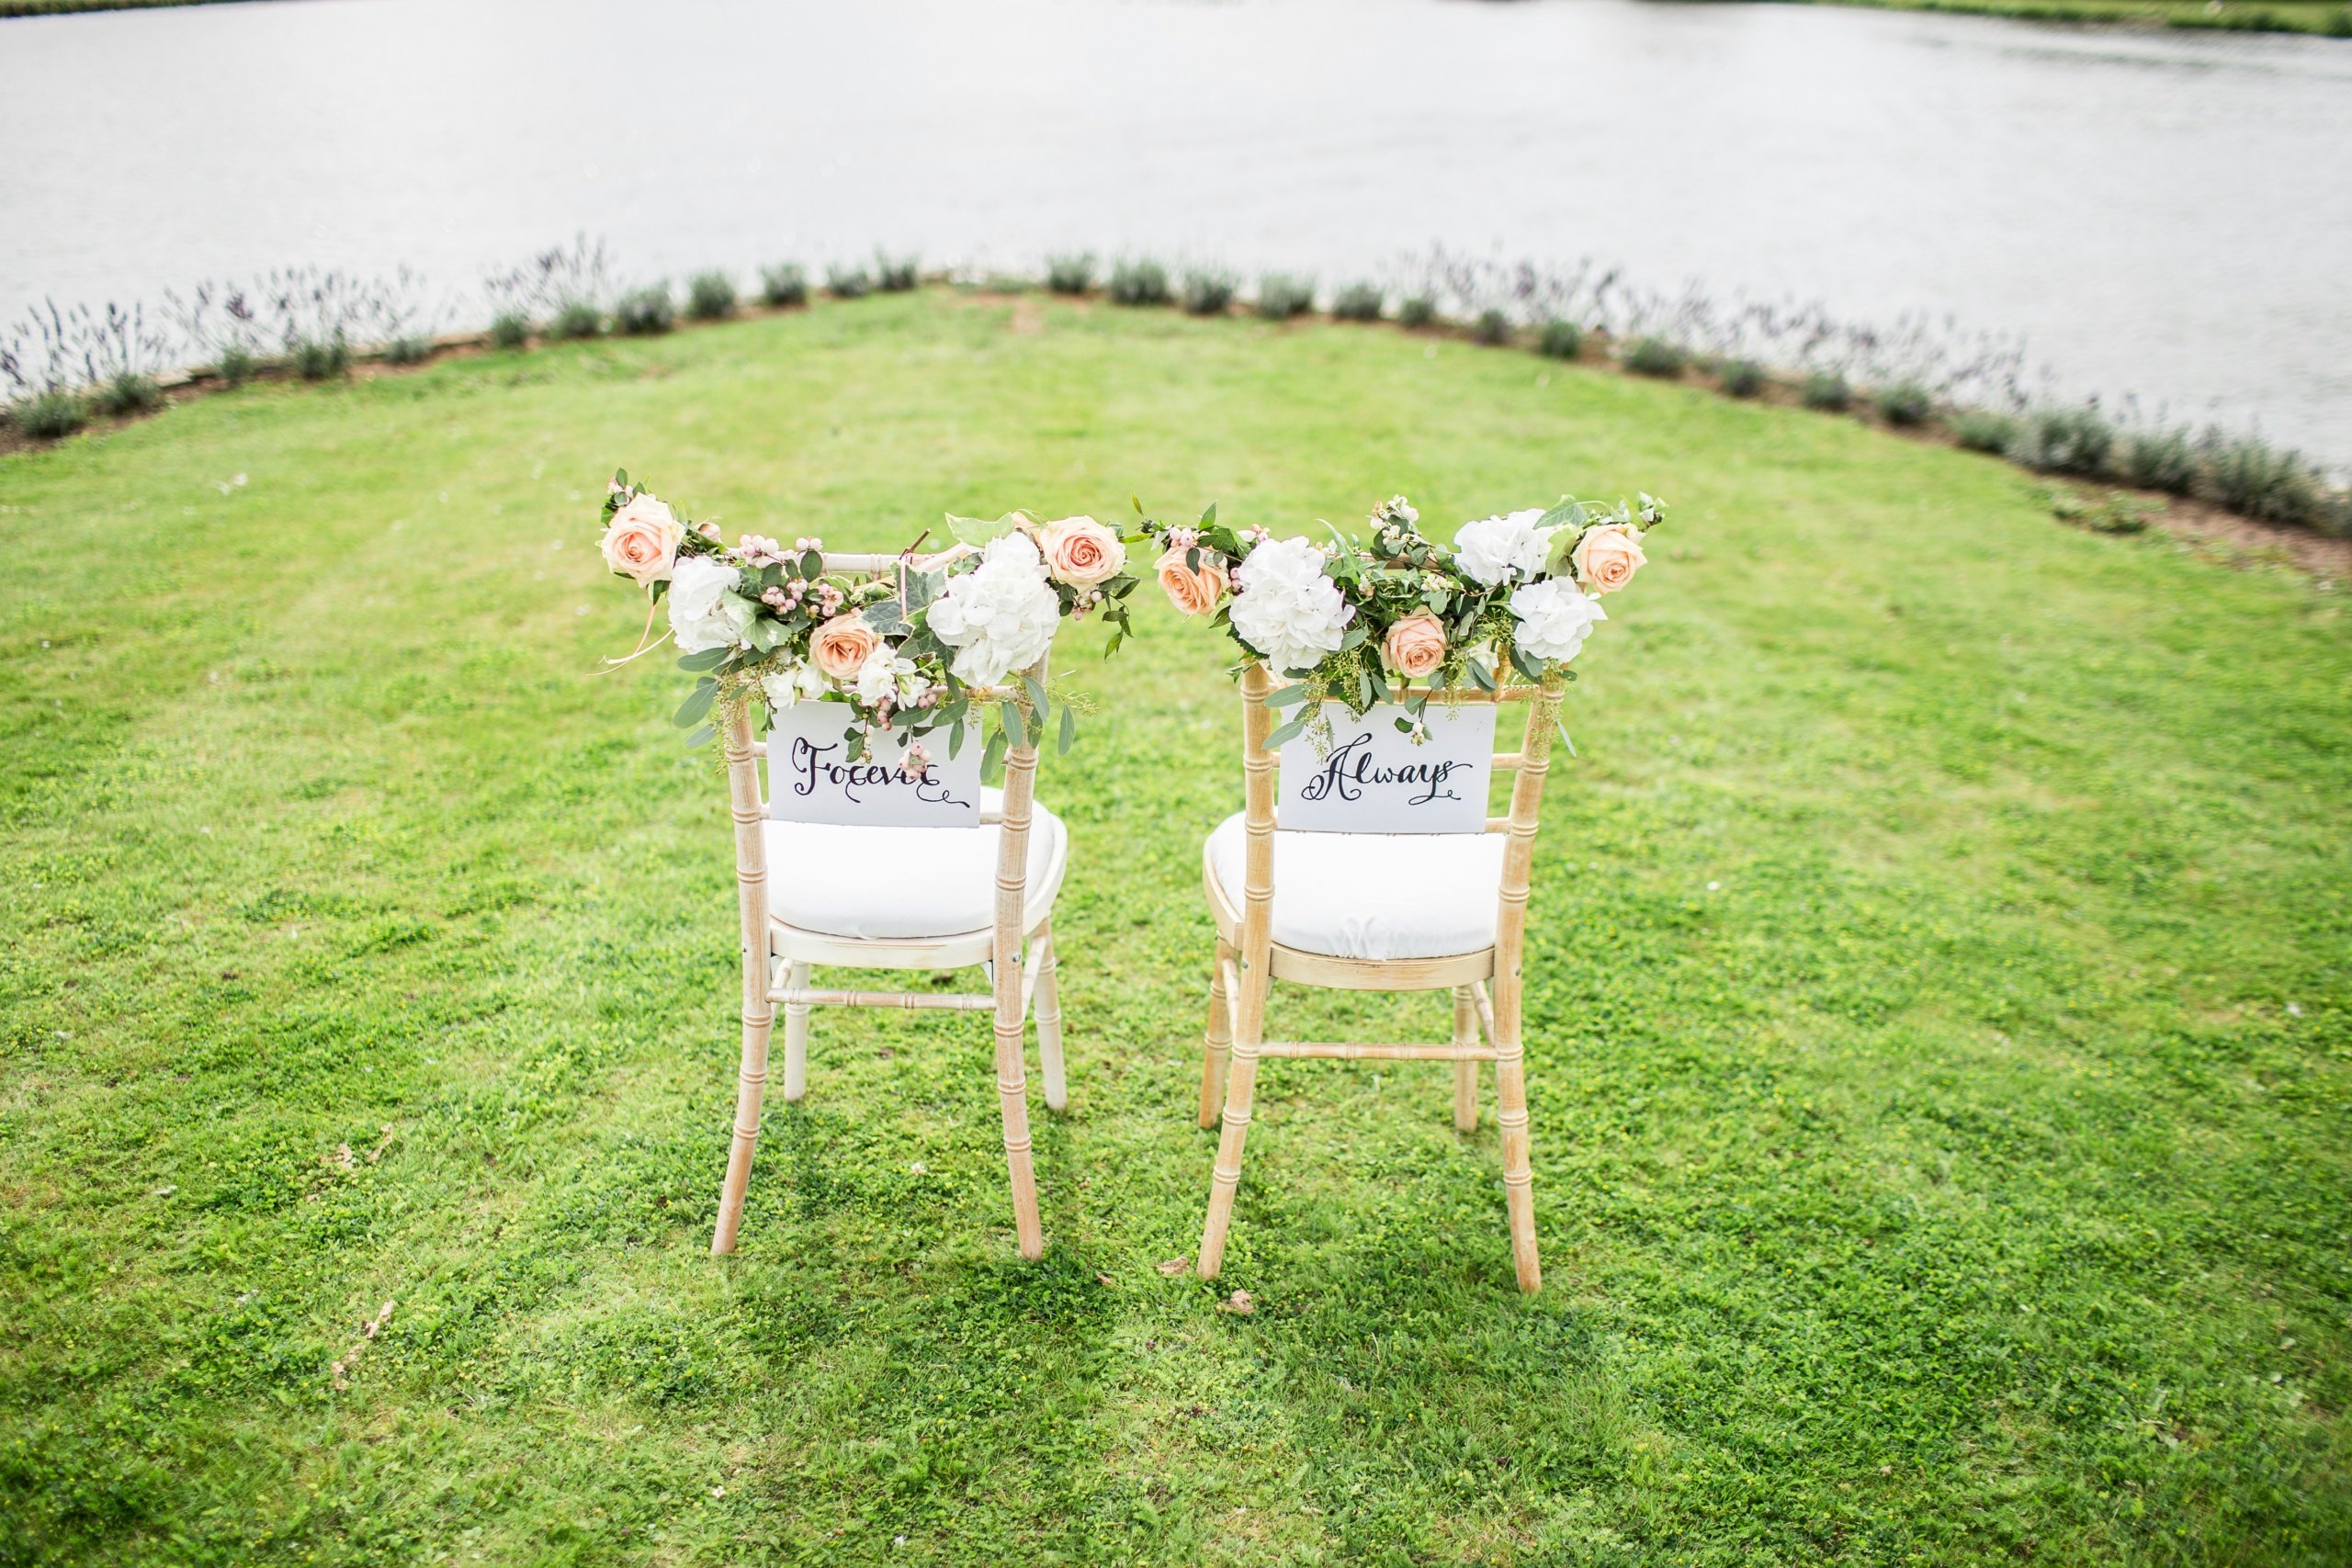 Can I Rent A Pontoon Boat For A Wedding Or Engagement Party?